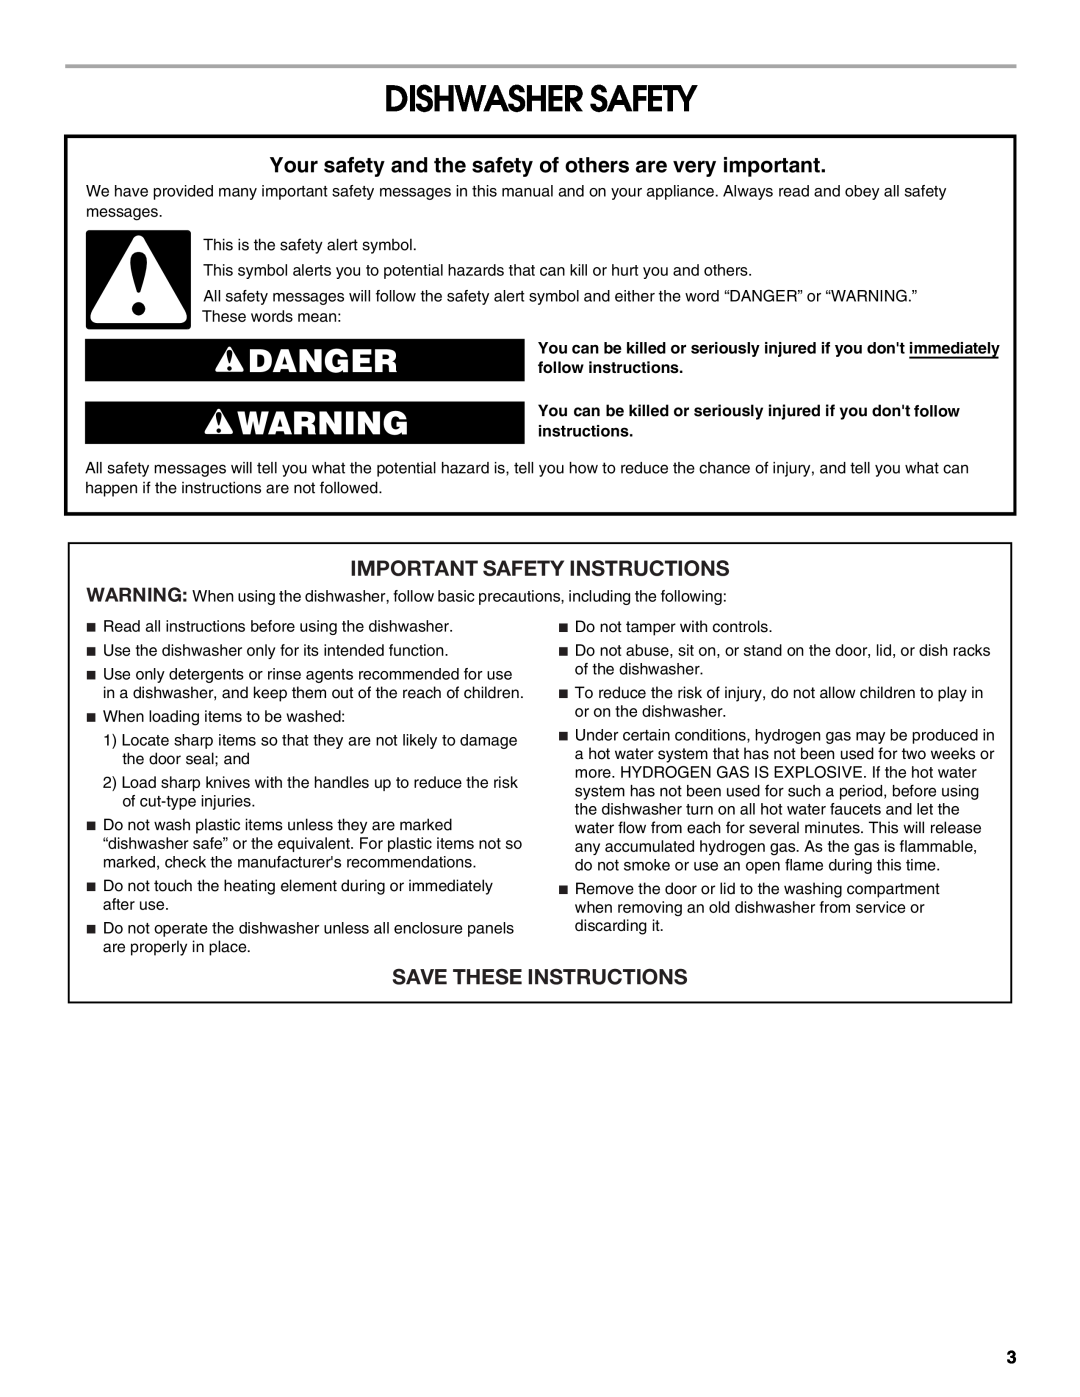 Estate TUD8700S manual Dishwasher Safety, Important Safety Instructions, Save These Instructions, Danger 